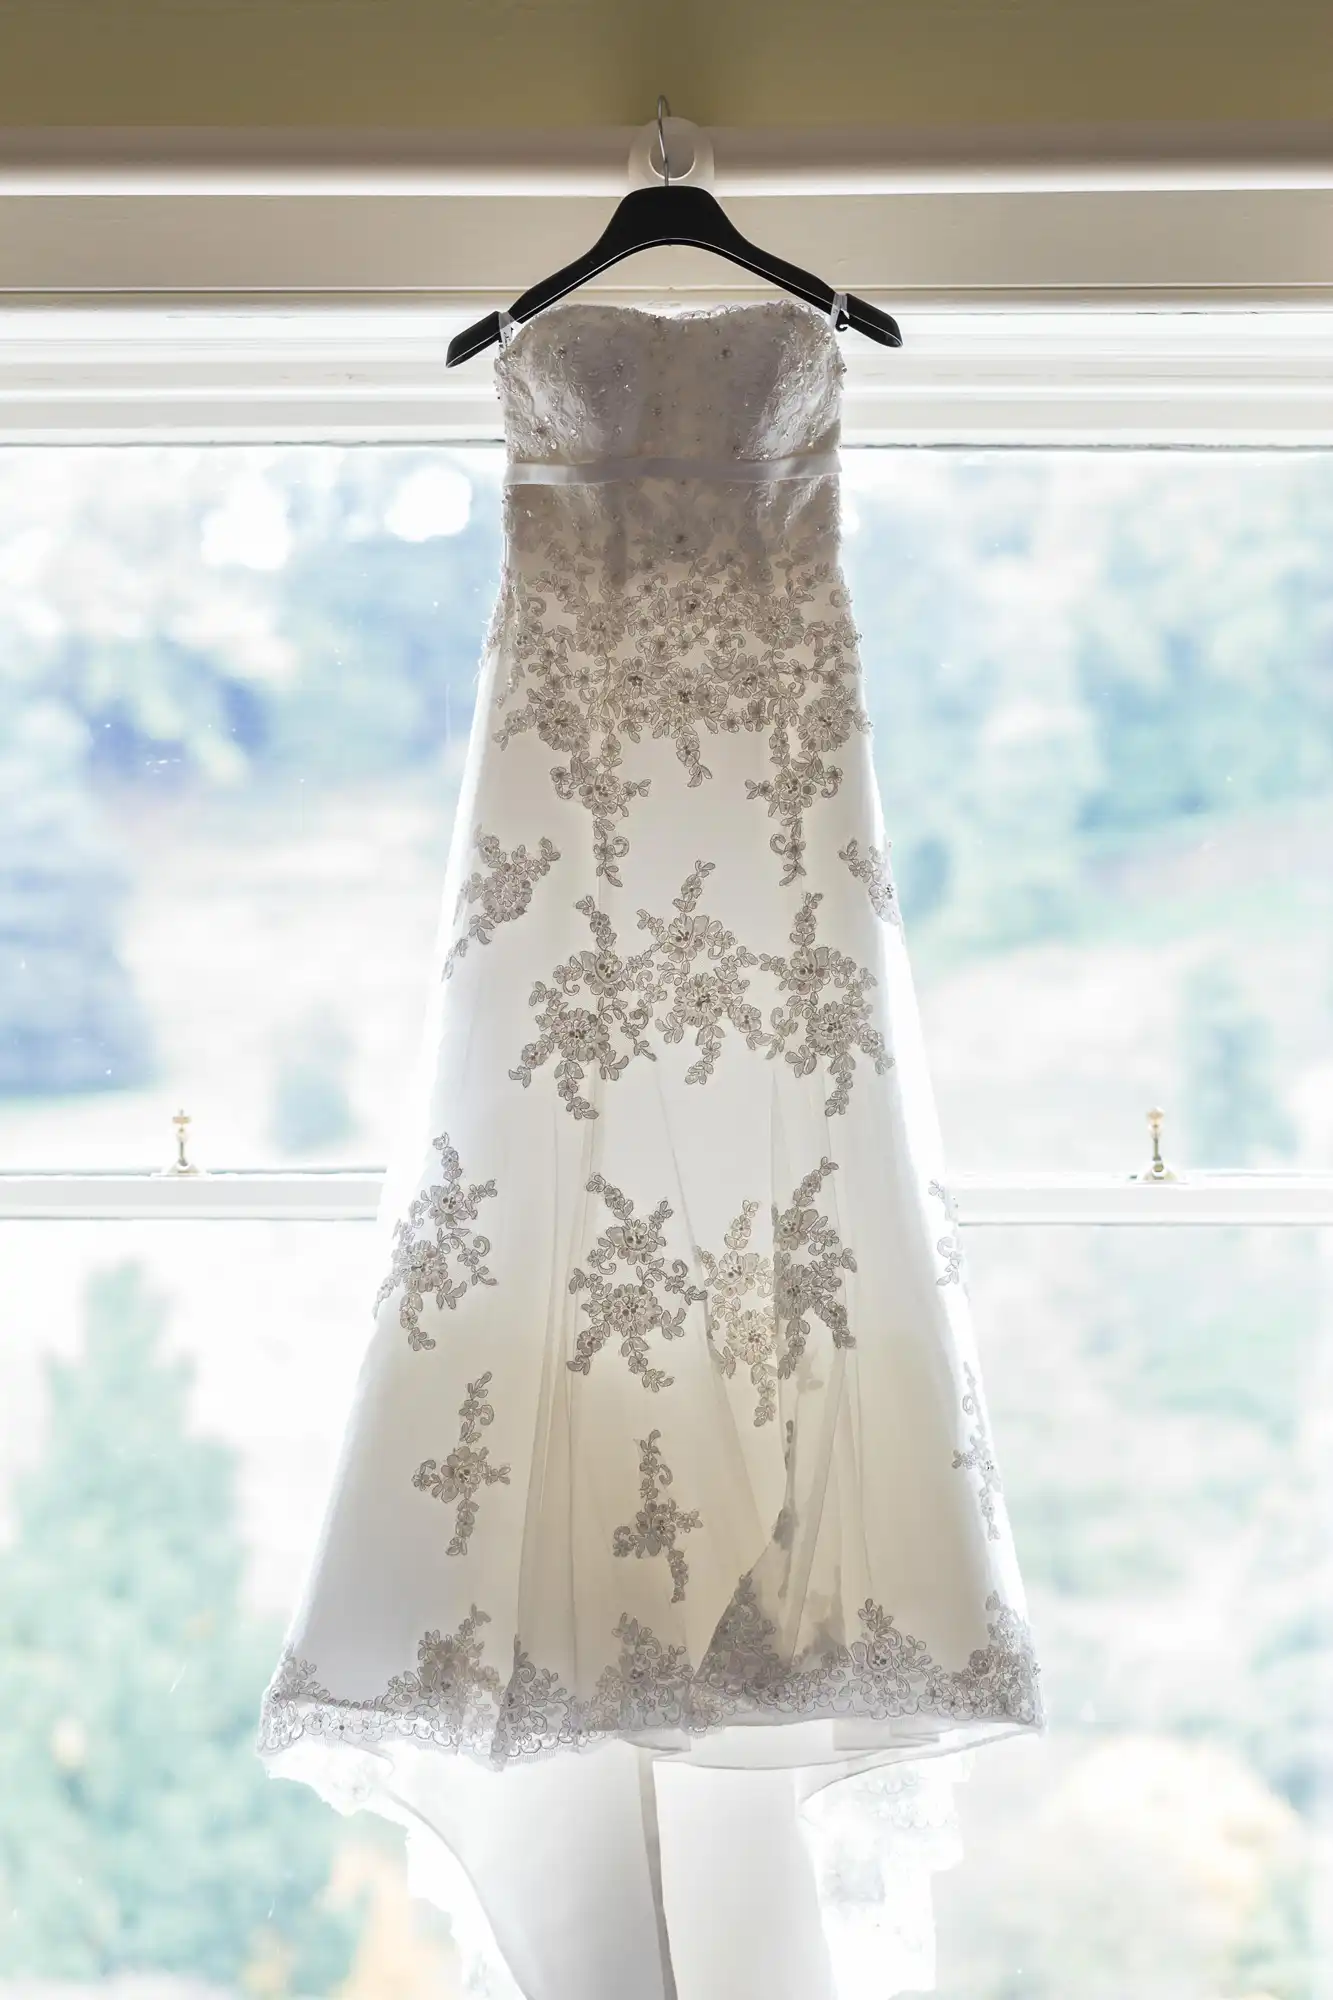 A white bridal gown with lace details hanging in front of a window, showcasing a scenic outdoor backdrop.